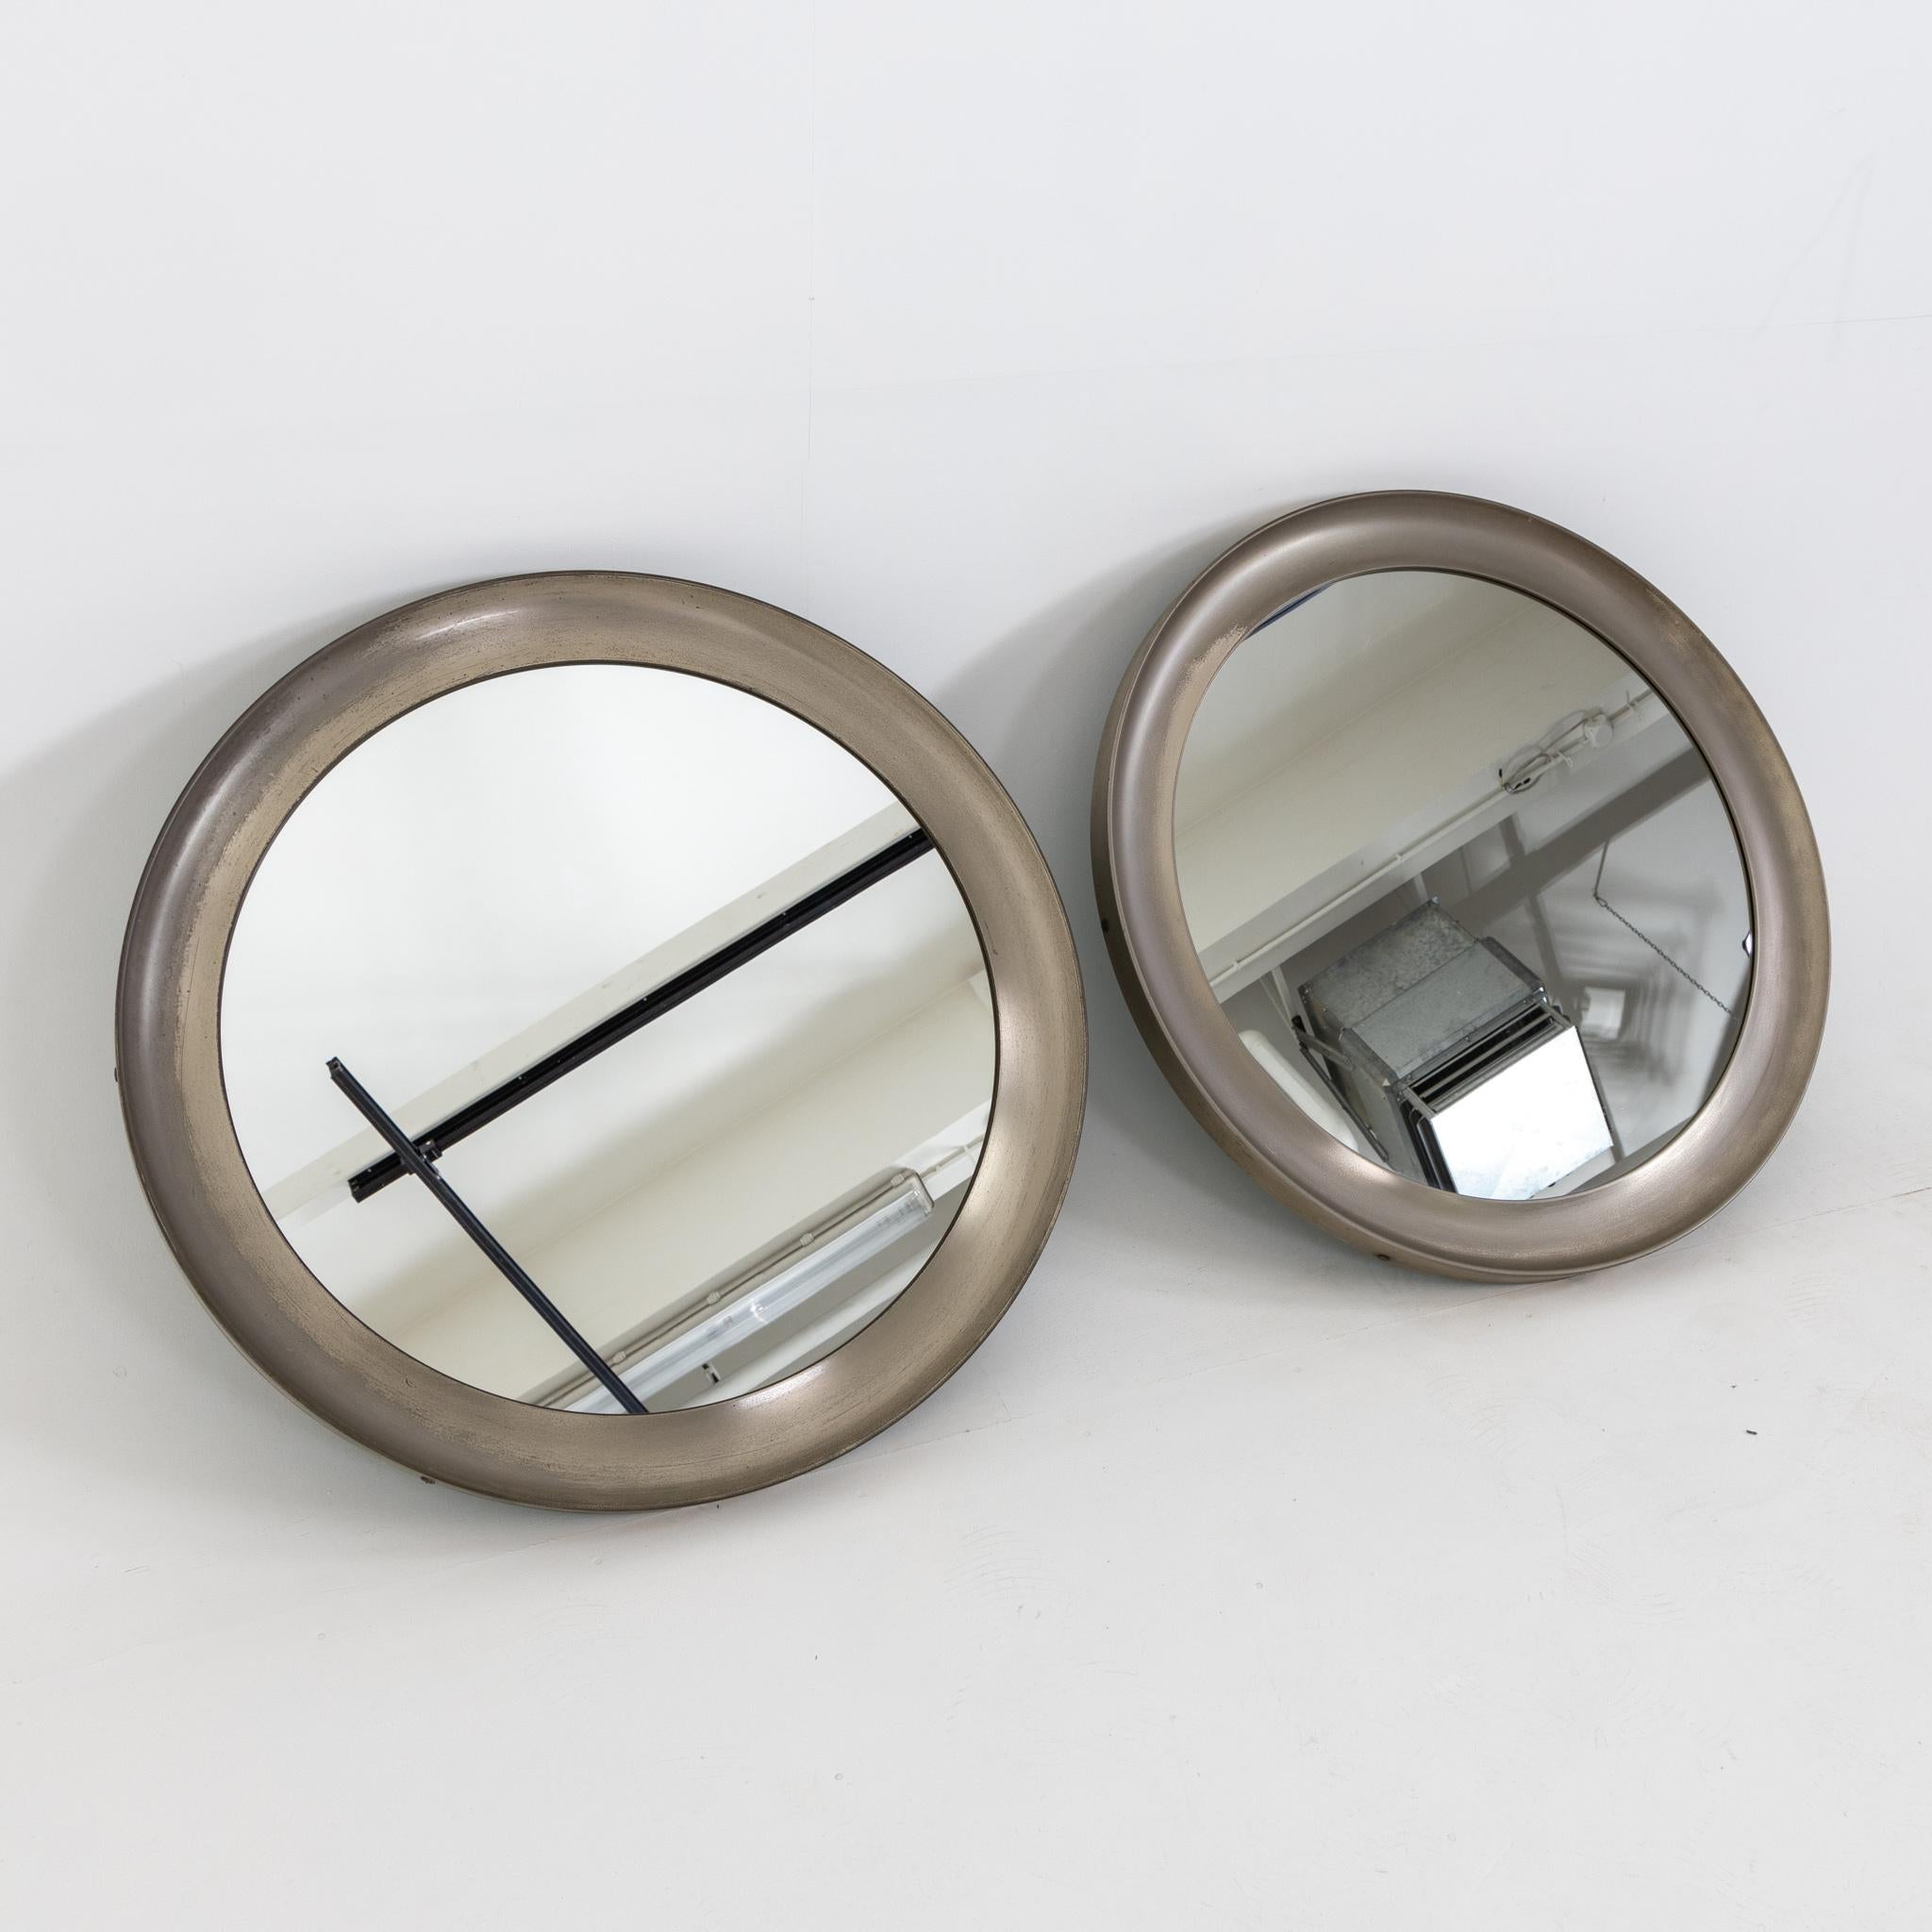 Two round wall mirrors with smooth metal frames with slight fillet.